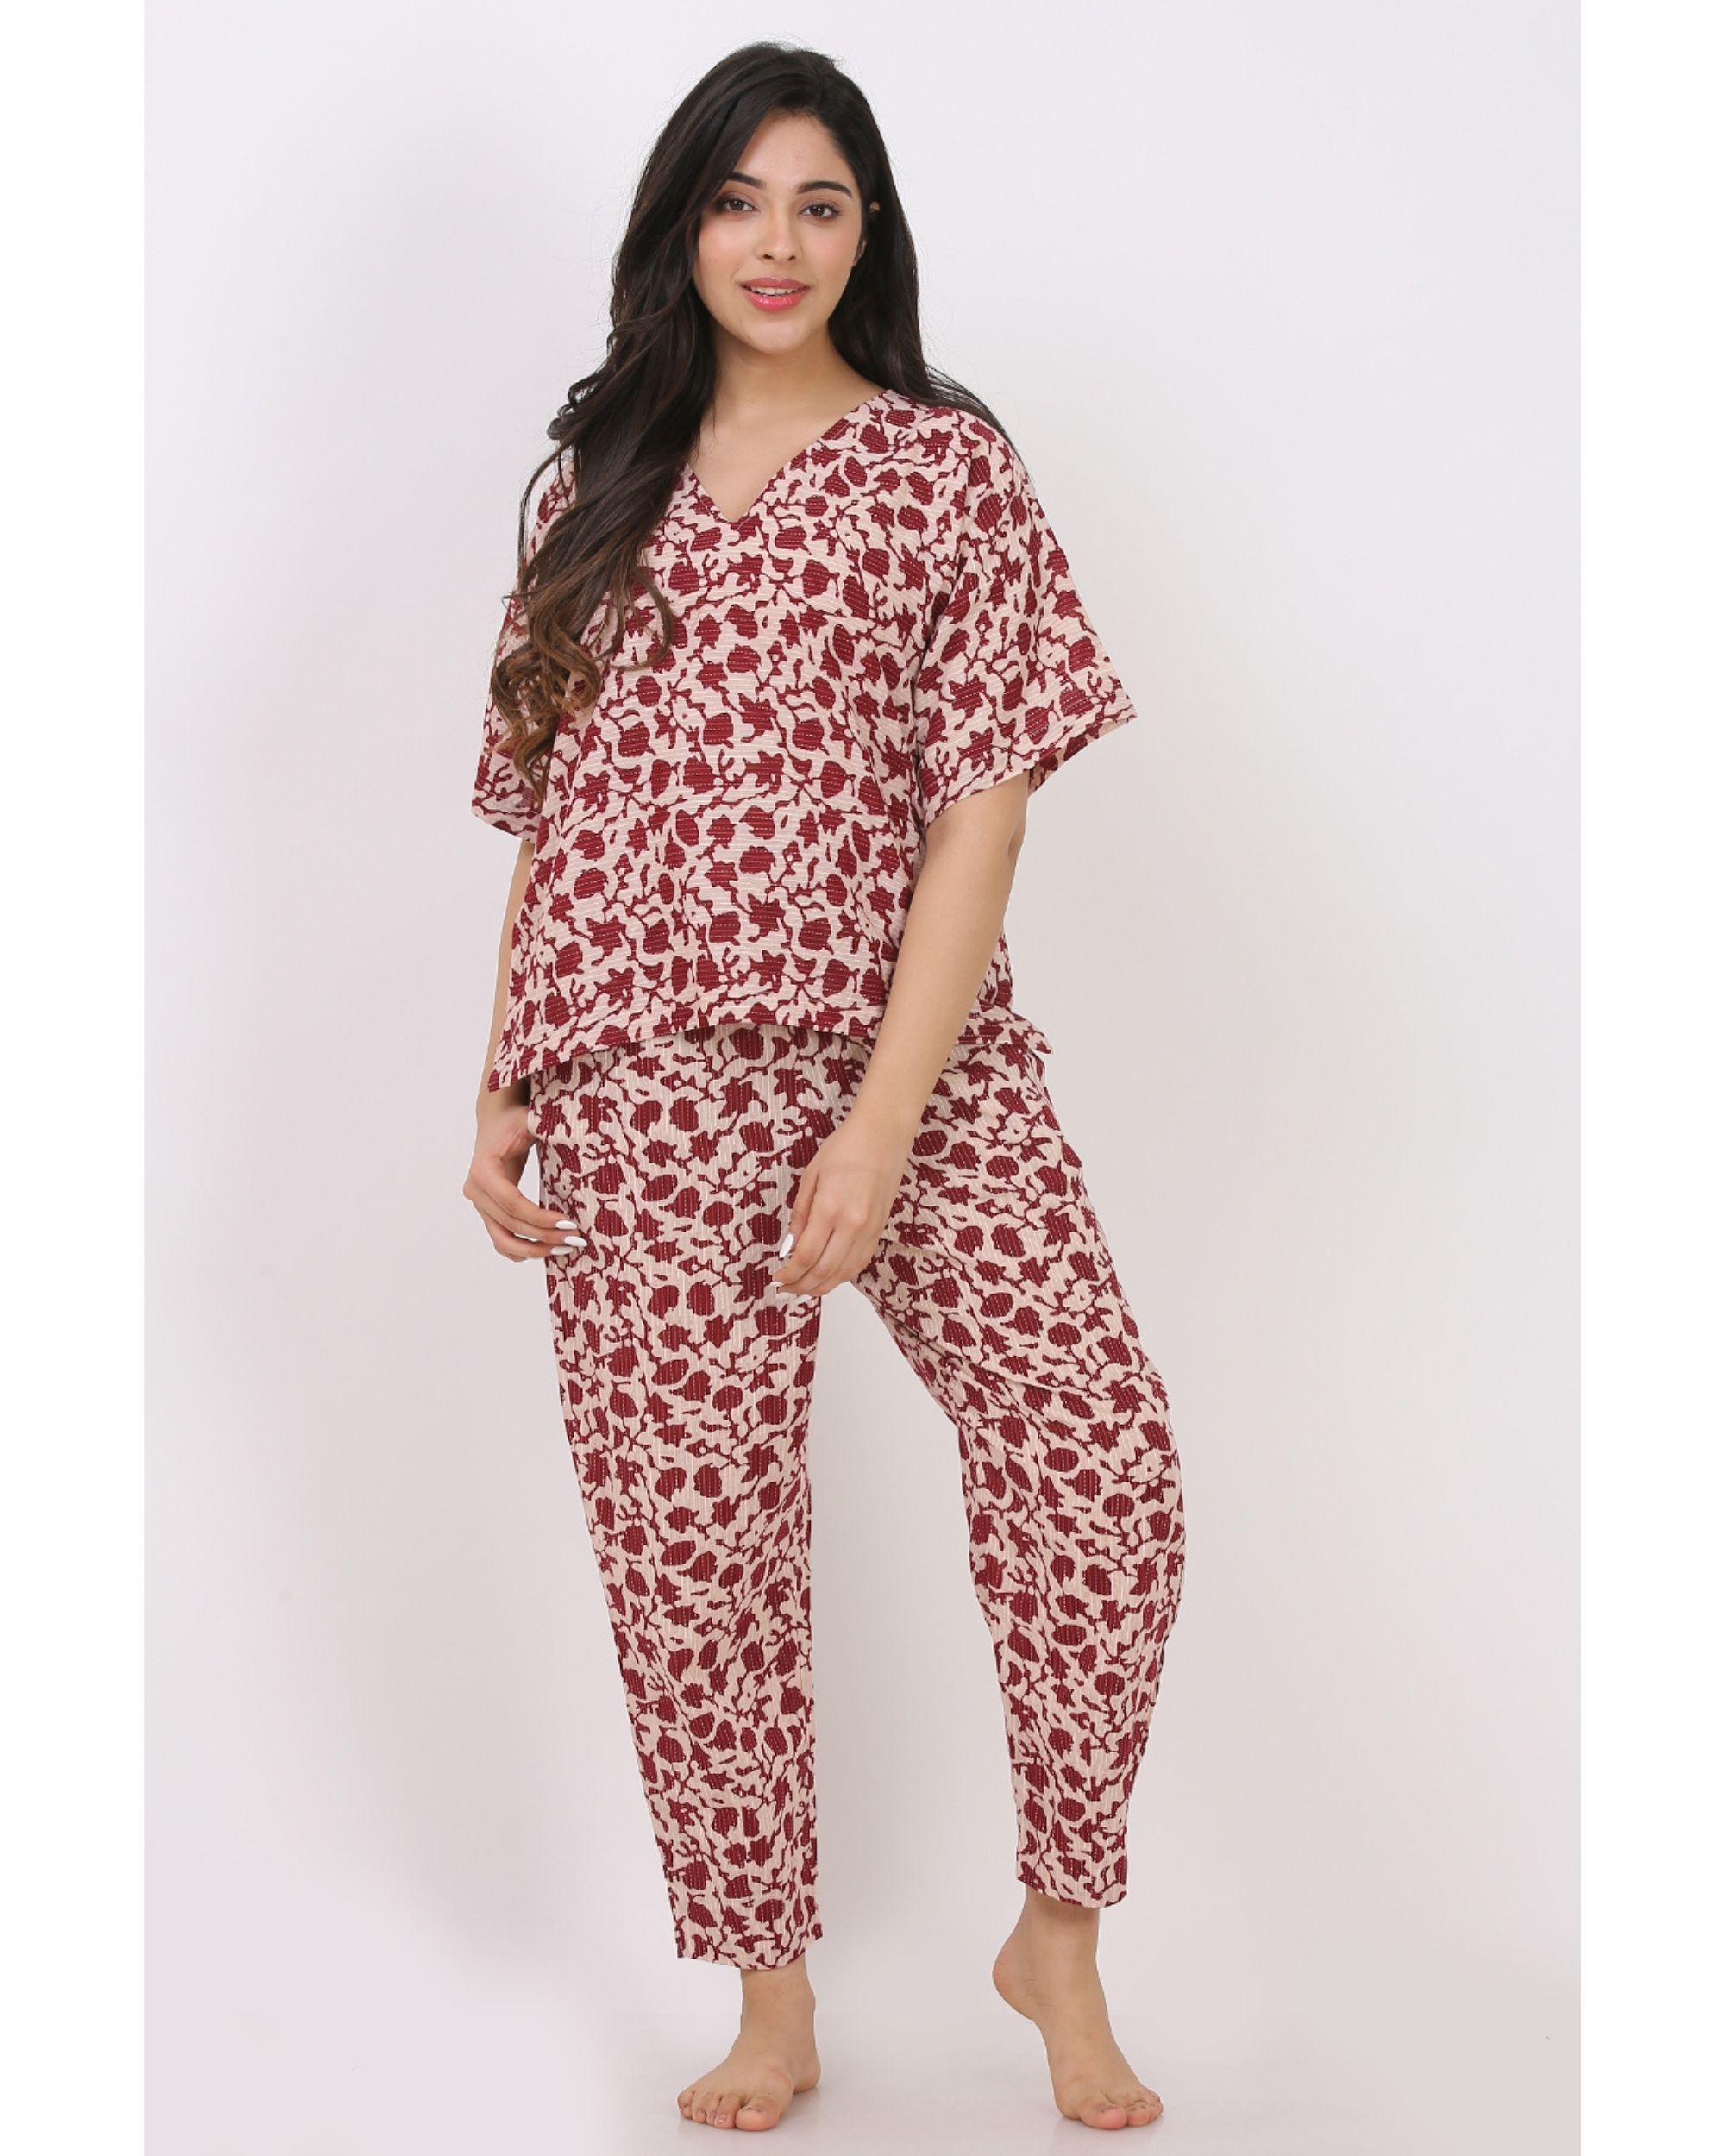 Maroon printed top with pants - set of two